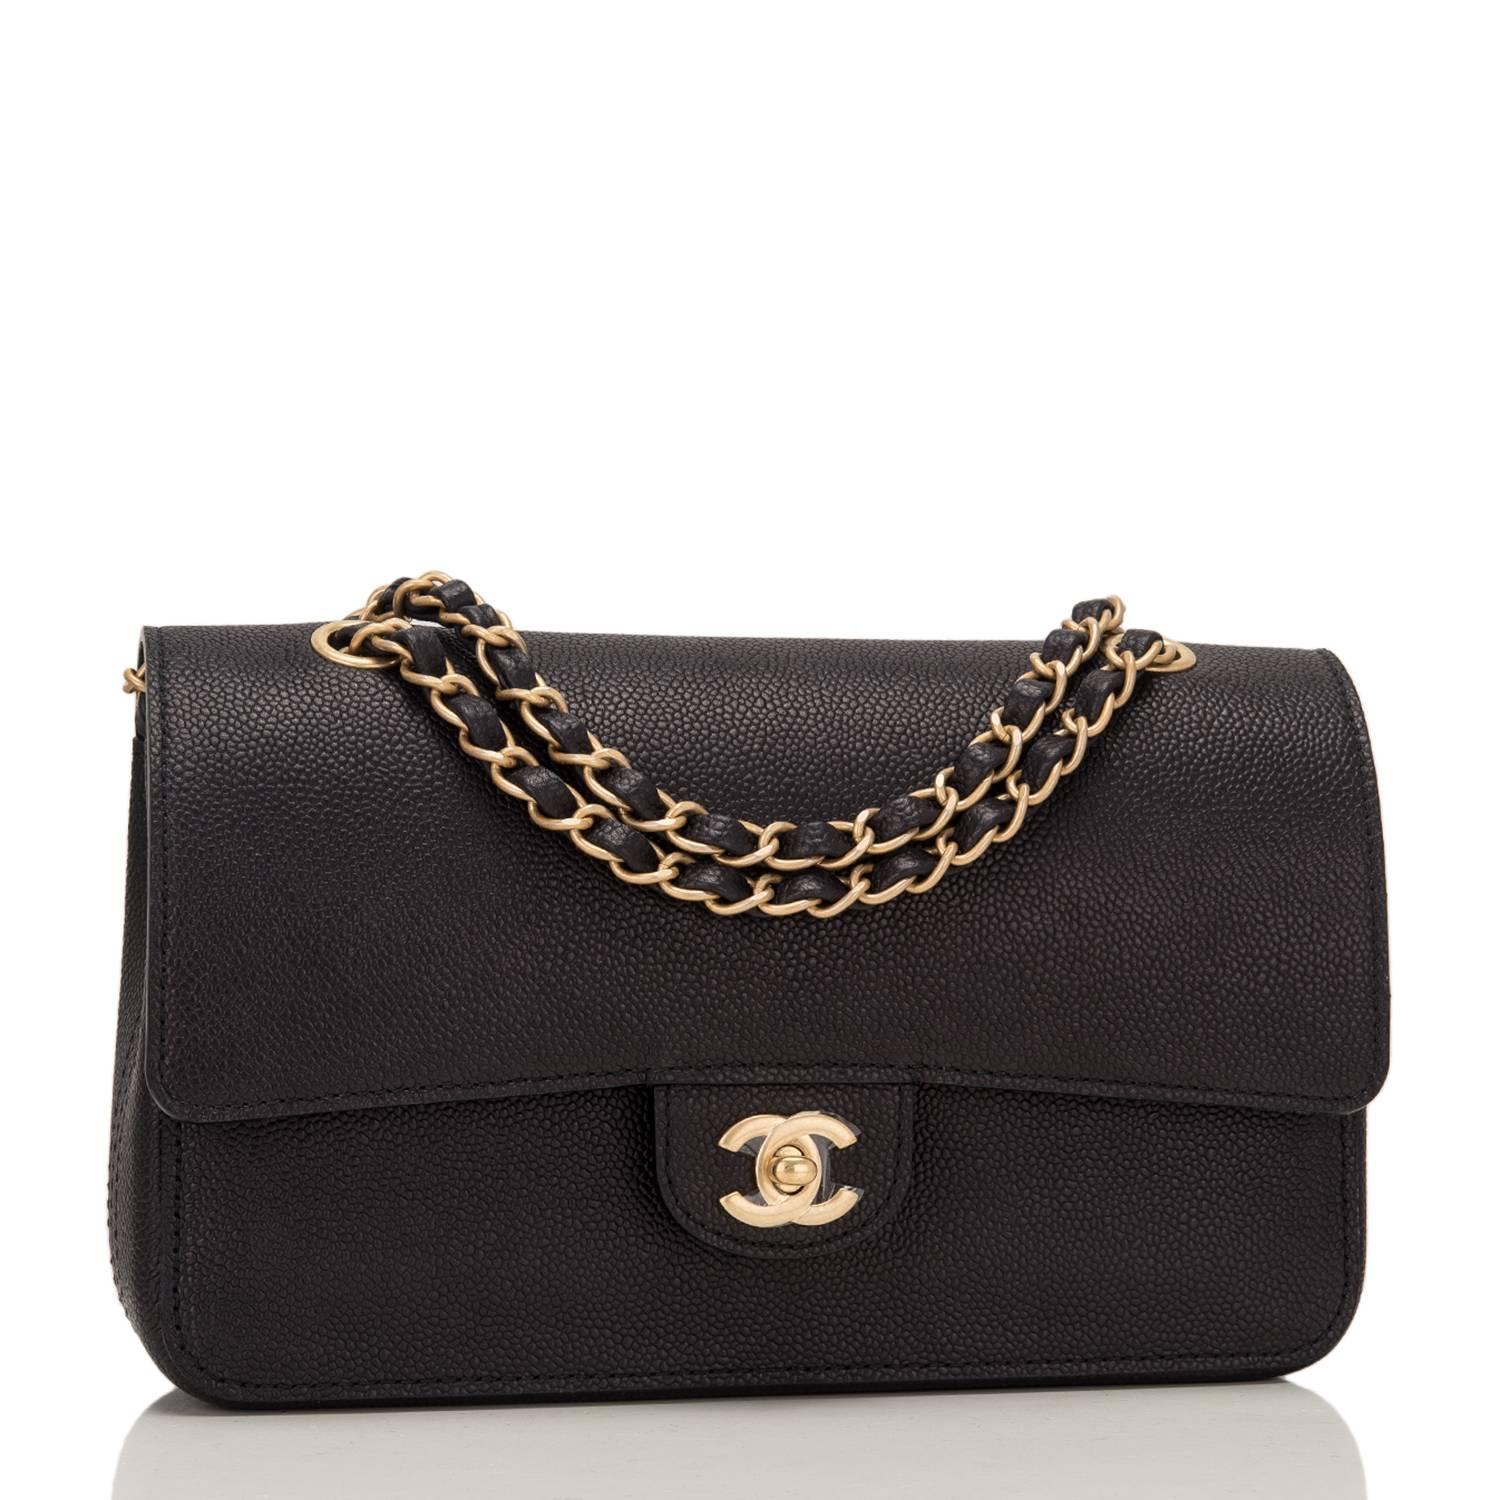 Chanel Medium Classic double flap bag of black caviar leather with gold tone hardware.

This bag features a front flap with signature CC turnlock closure, a half moon back pocket, and an adjustable interwoven gold tone chain link with black leather